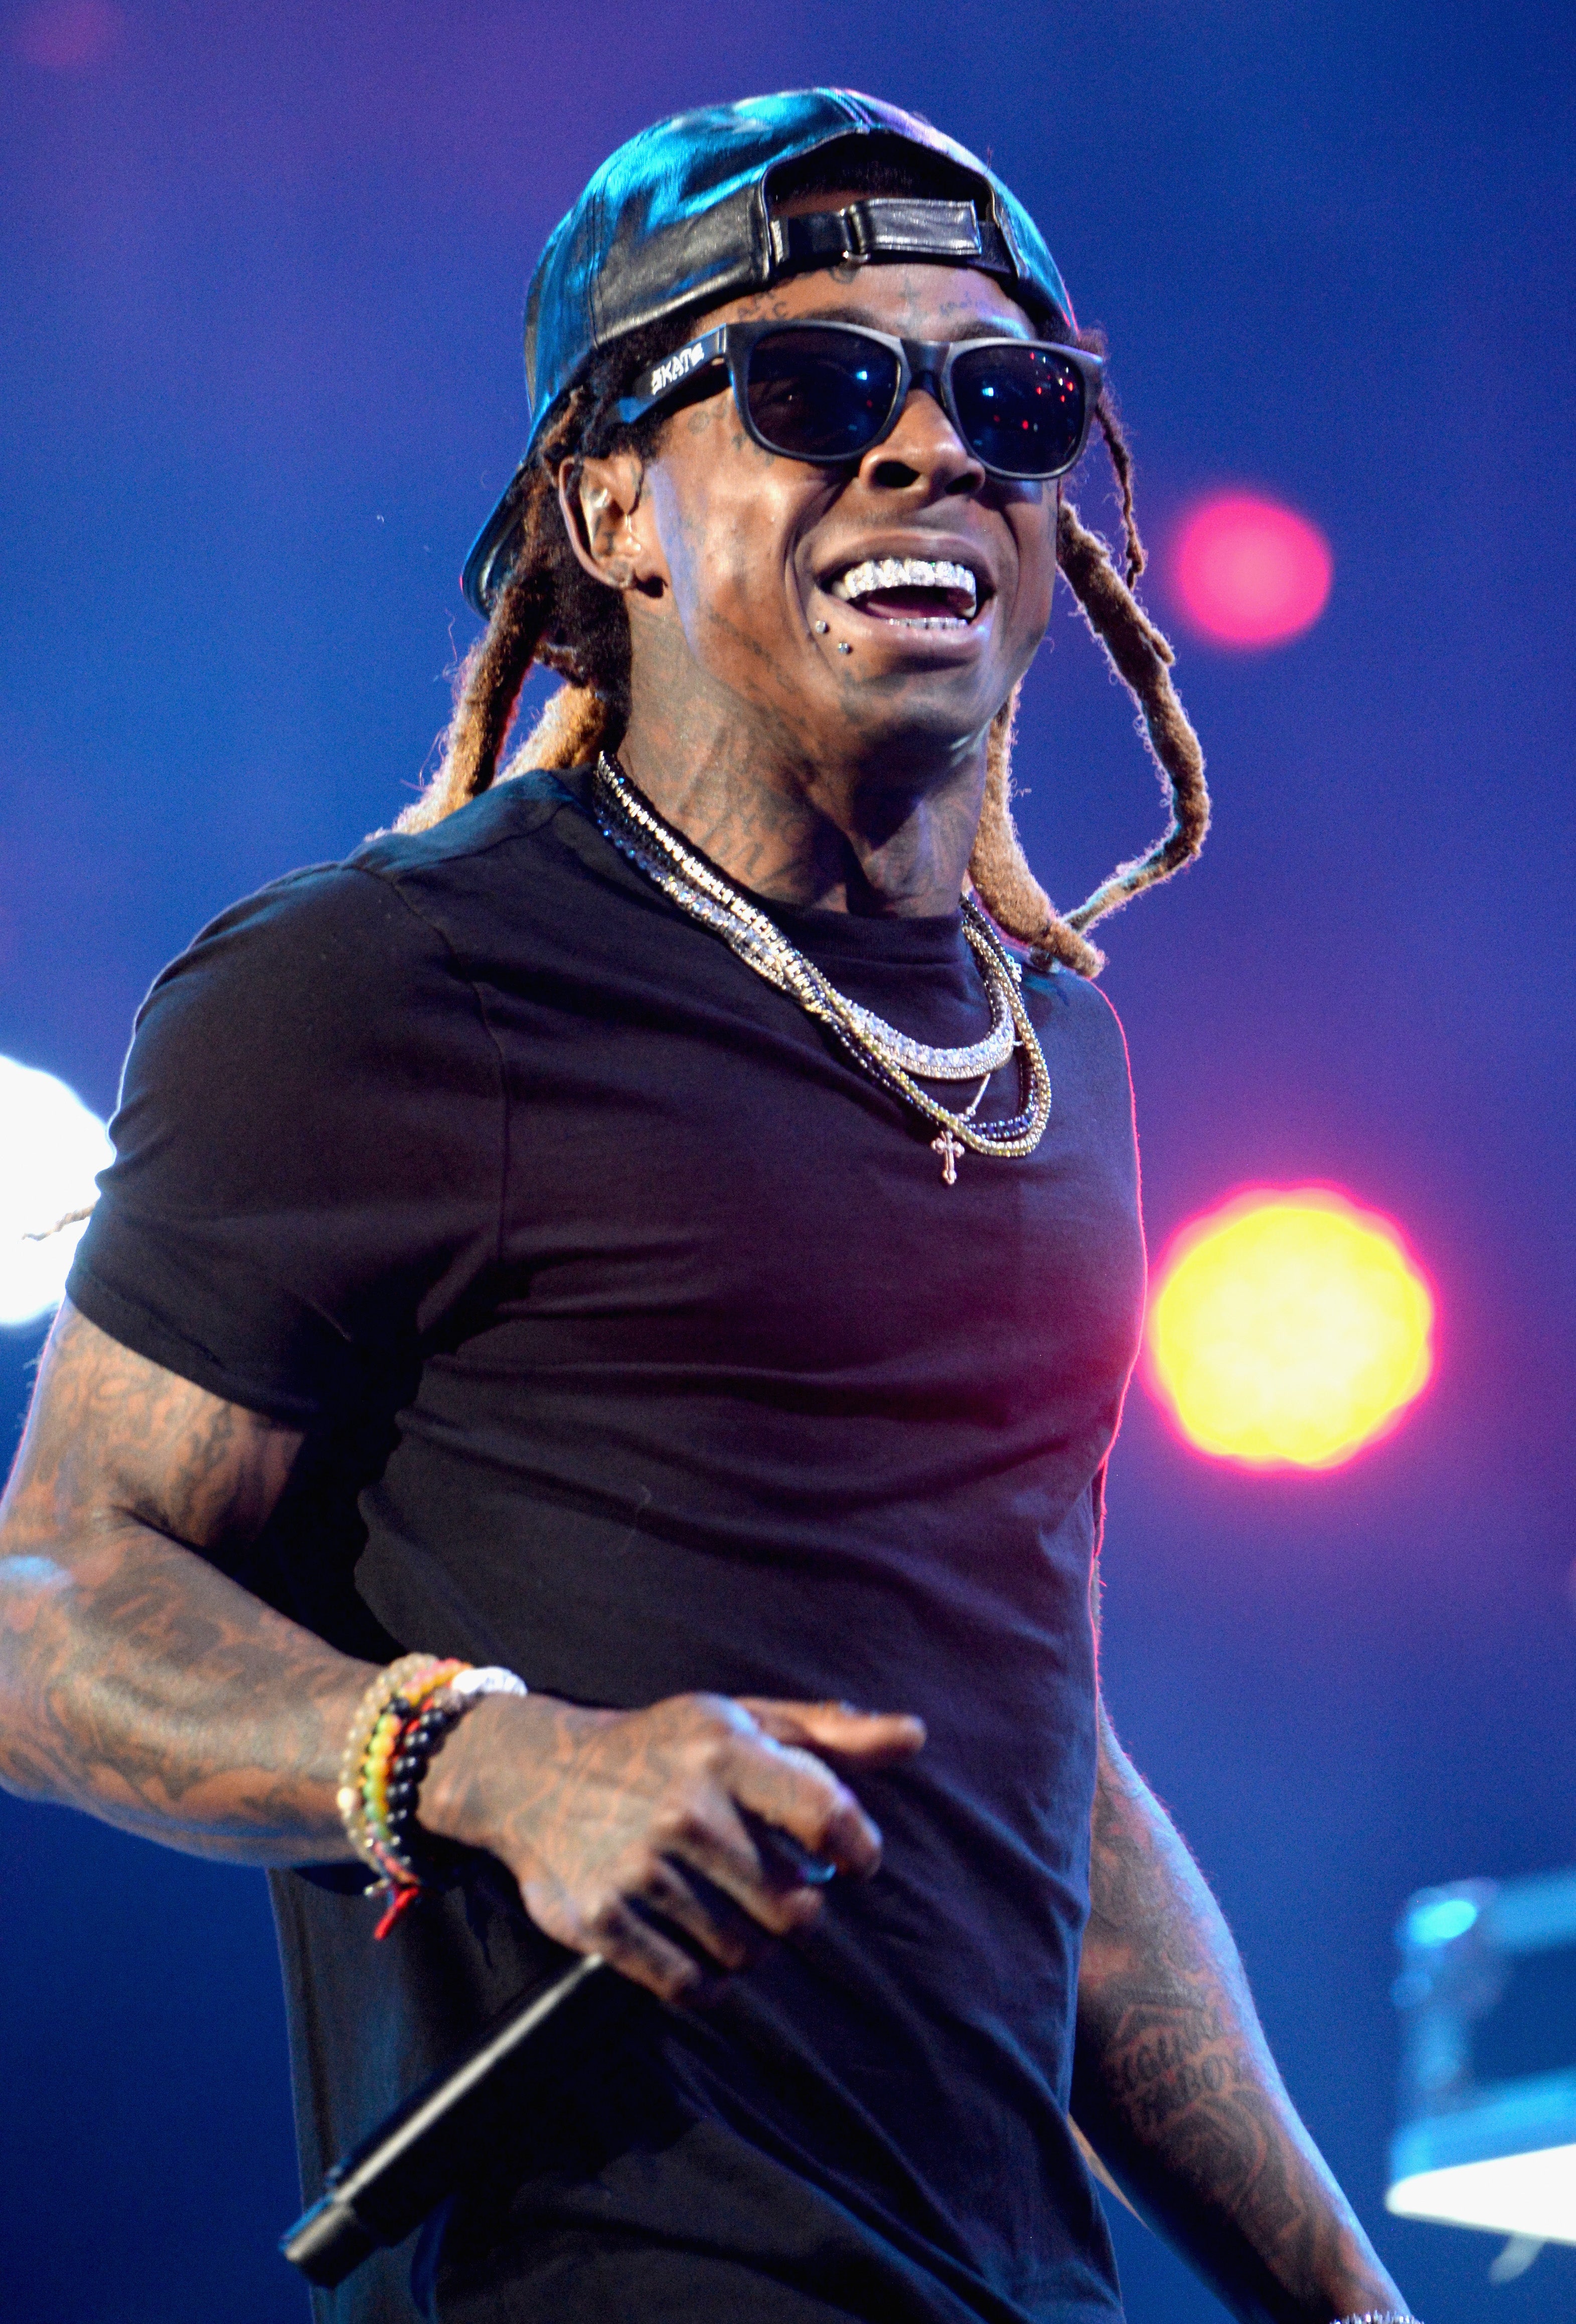 Lil Wayne's Reasoning Behind "Racism Doesn't Exist" Comment Will Leave You Scratching Your Head